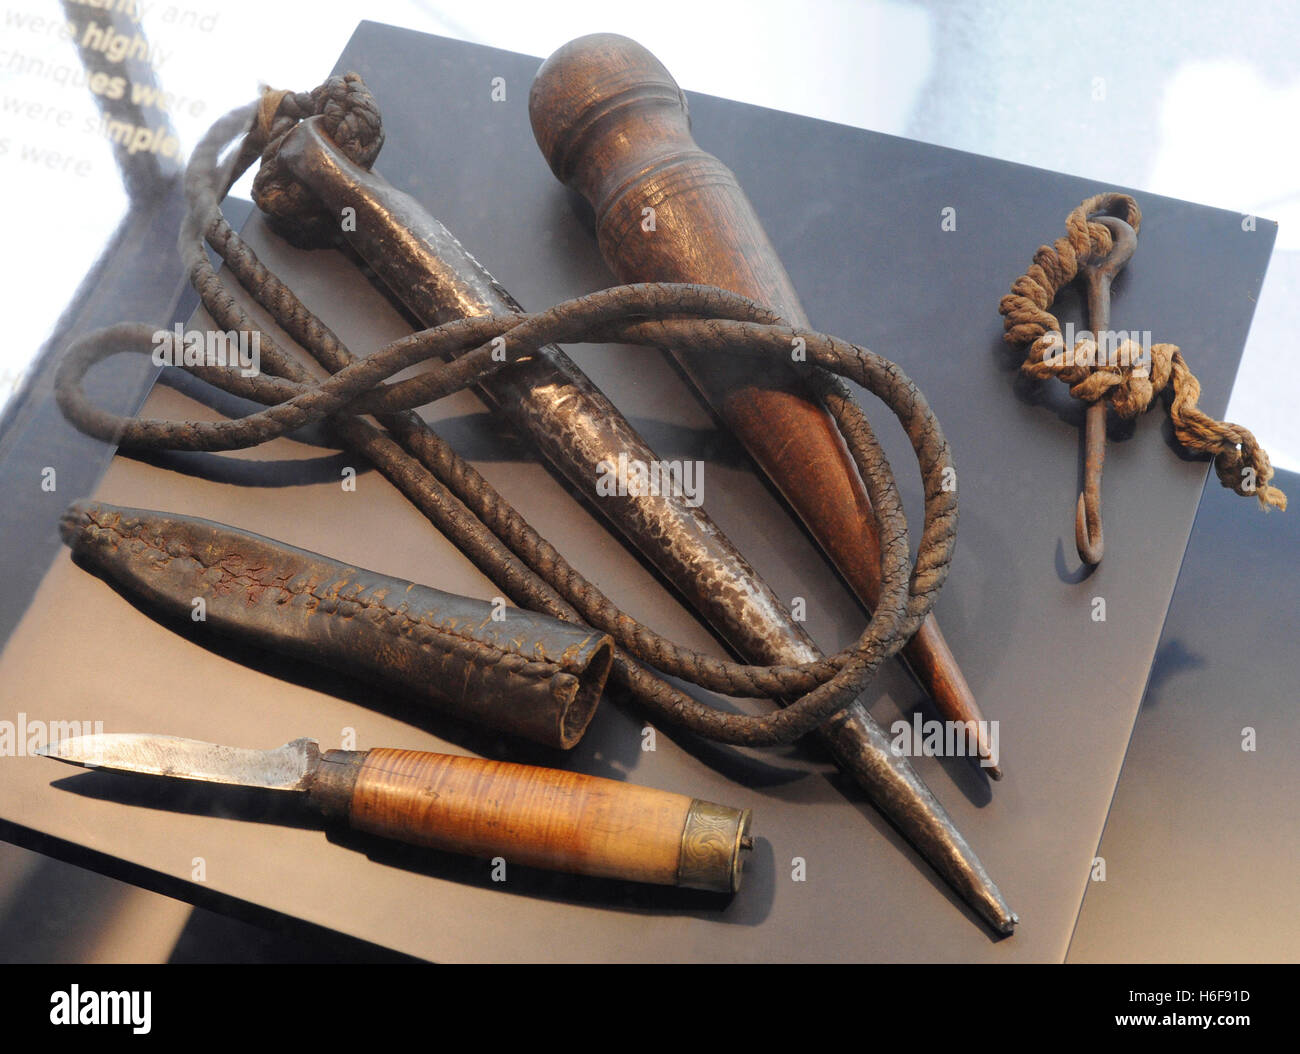 Work on the sailing ships. Maintenance work. Tools: sailmarker's bench hook, marlinspike, pricker and knife with scabbard. Norwegian Maritime Museum. Oslo. Norway. Stock Photo